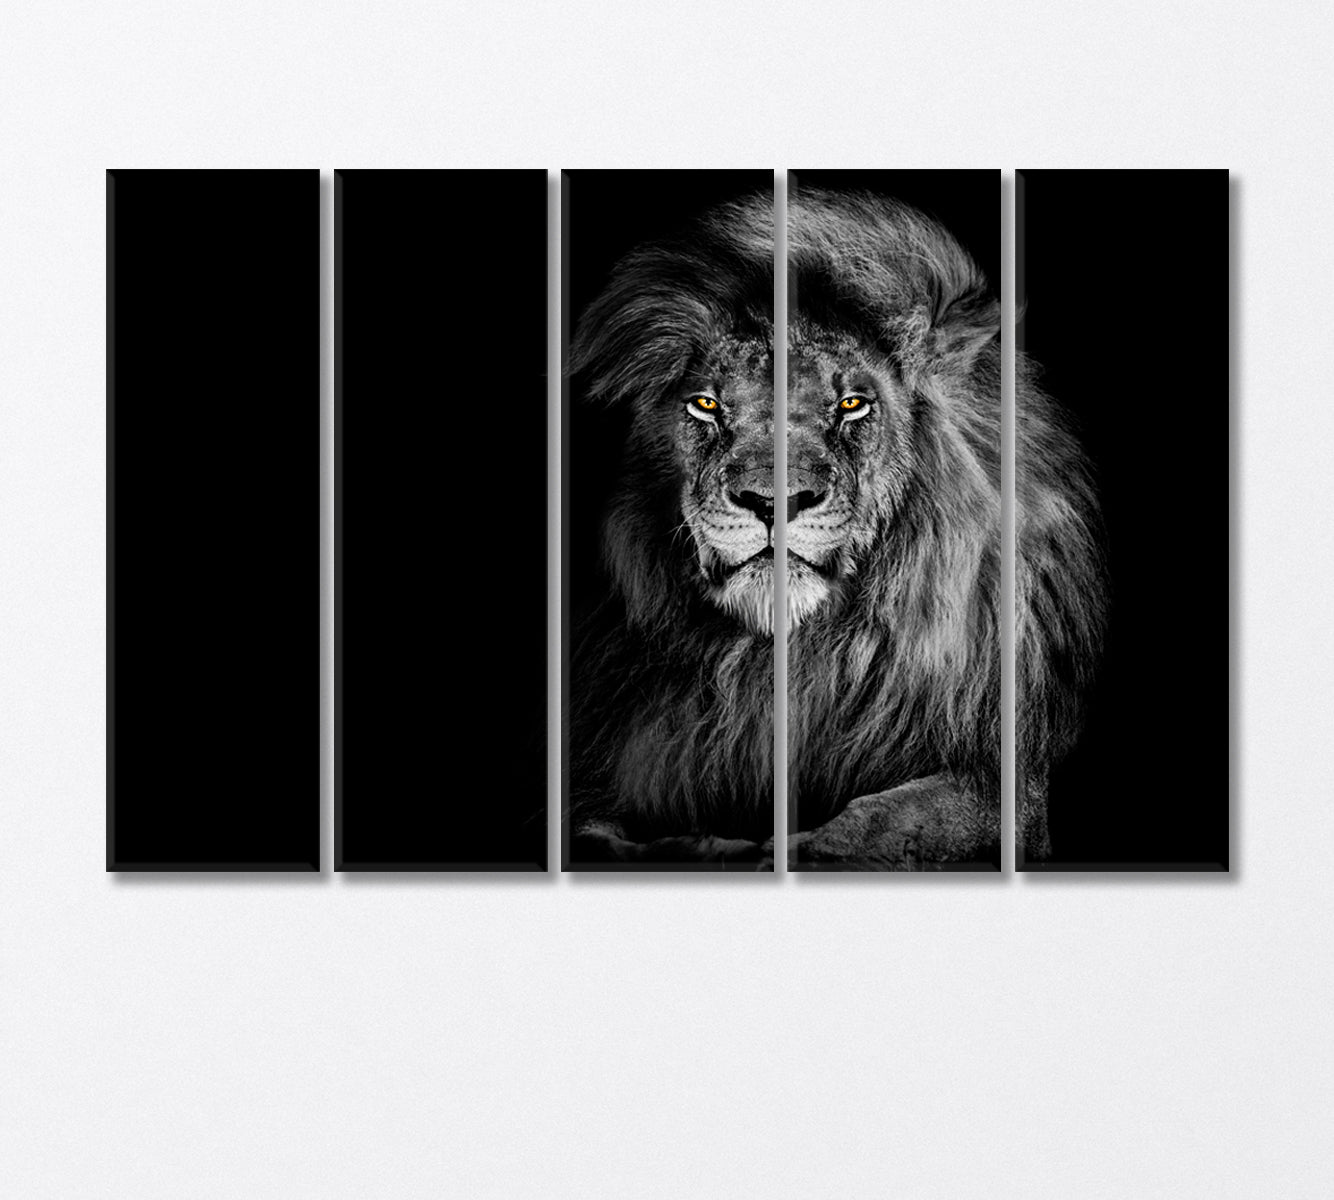 Lion King in Black and White Art Canvas Print-Canvas Print-CetArt-5 Panels-36x24 inches-CetArt